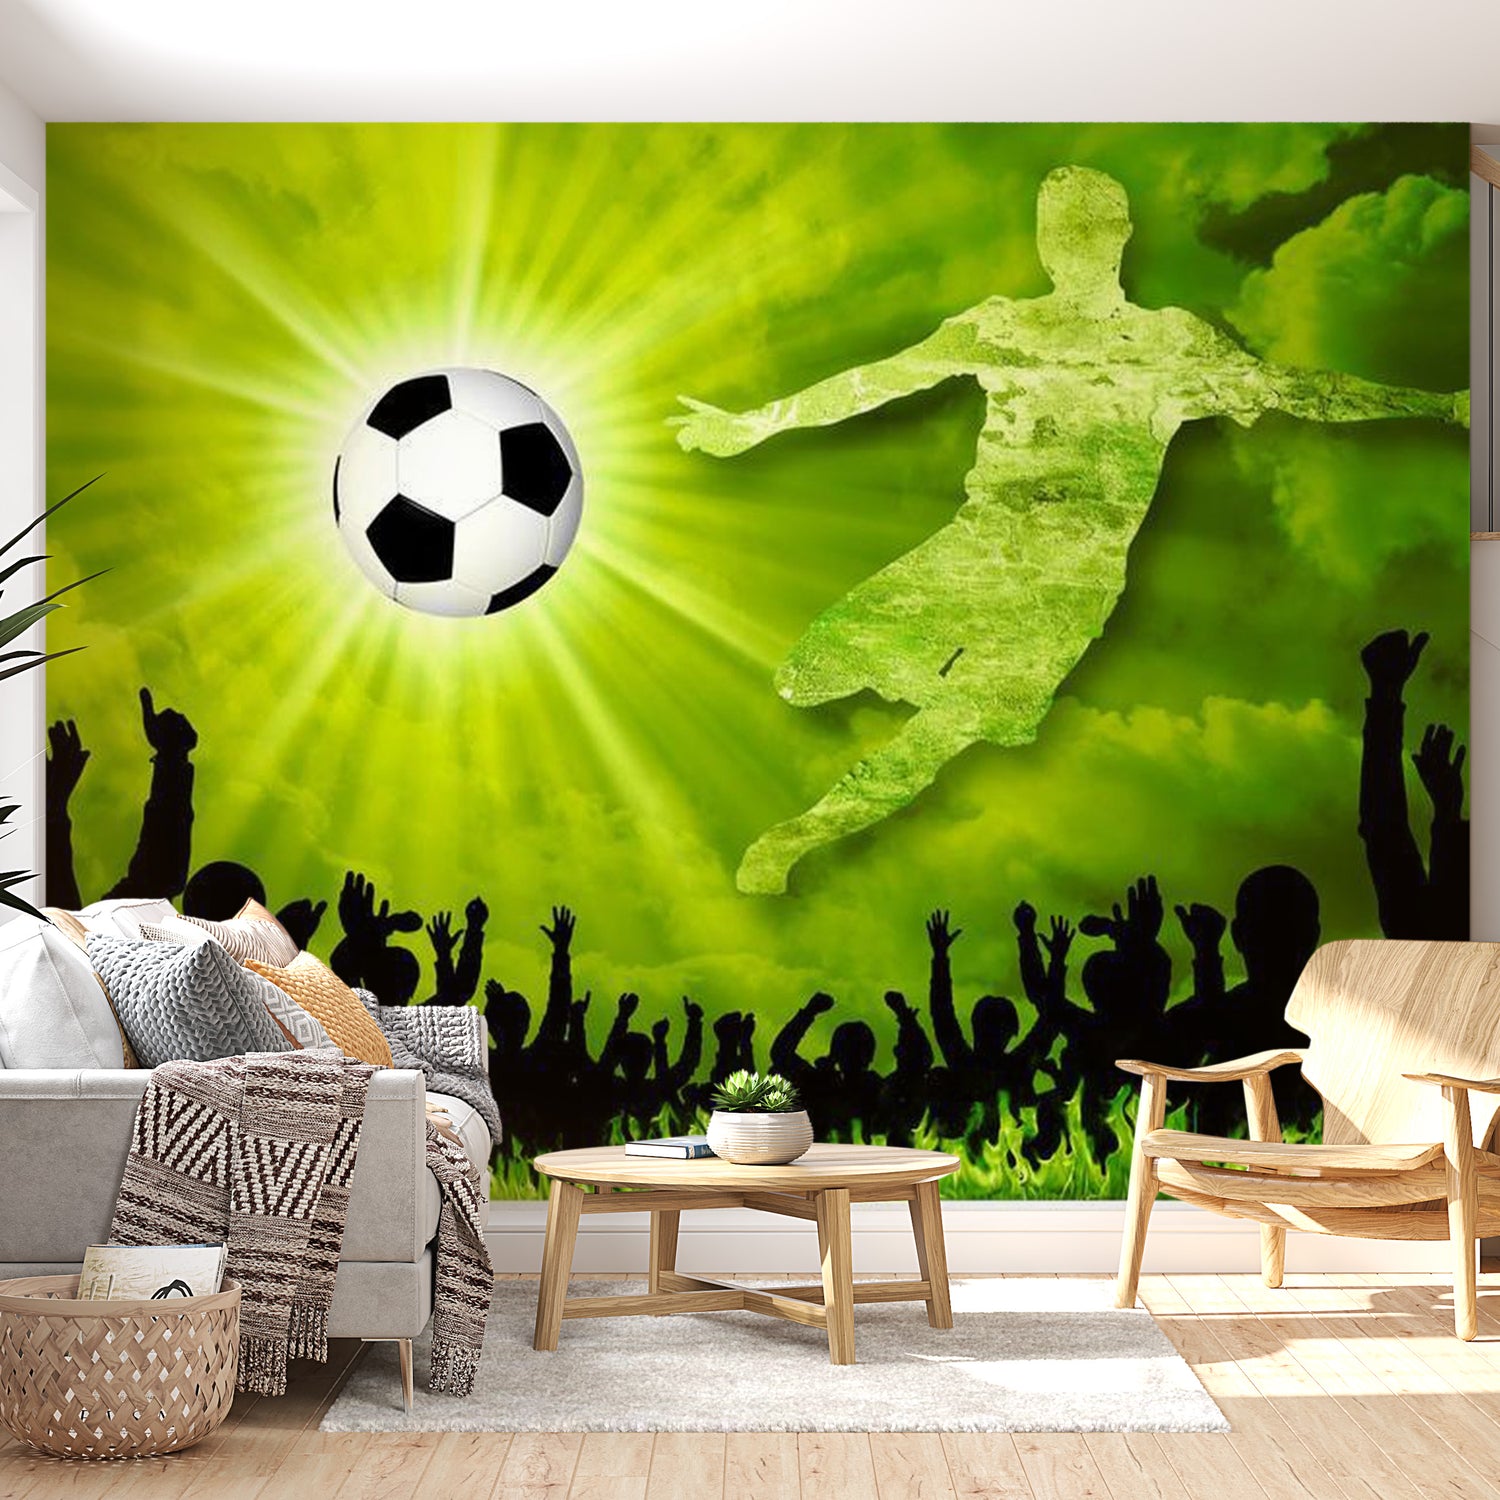 Peel & Stick Football Wall Mural - Victory - Removable Wall Decals